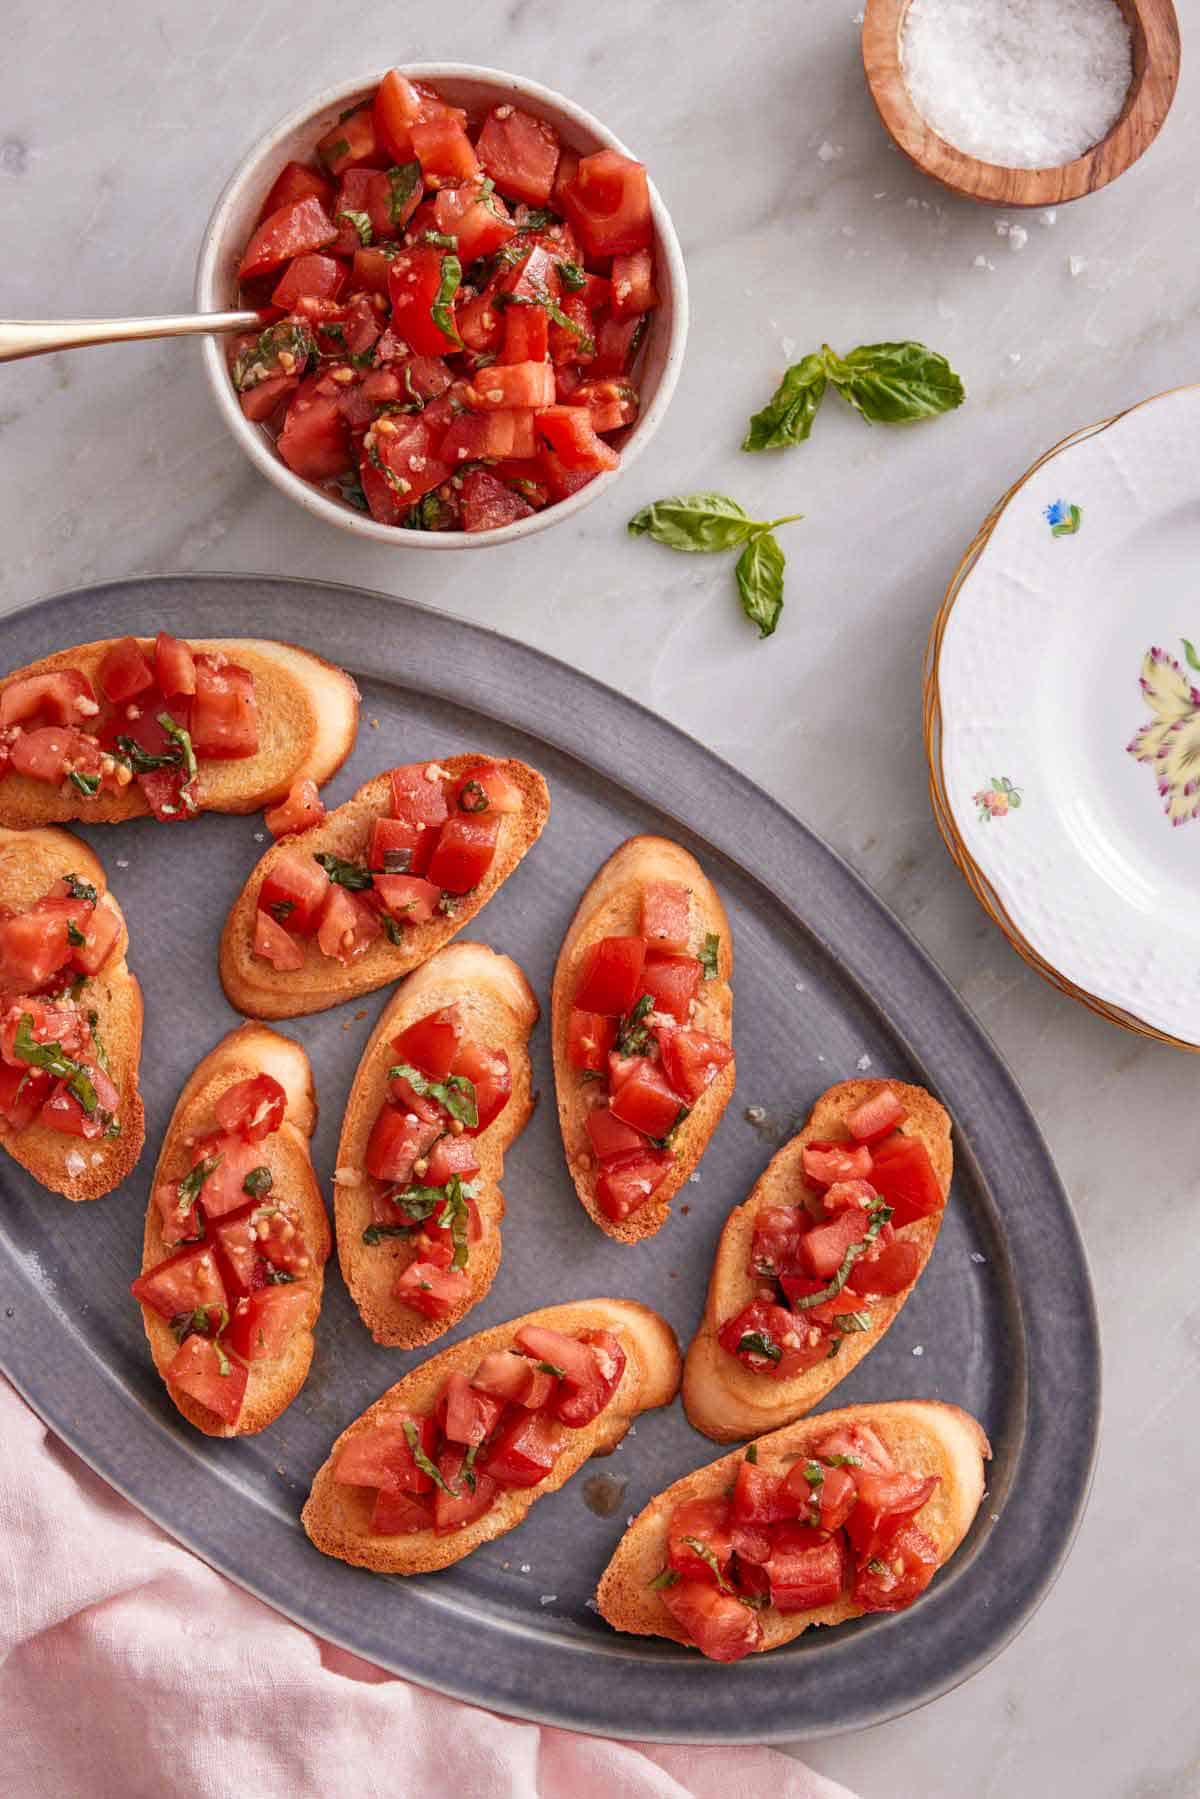 Overhead view of a grey platter with bruschetta with a bowl of tomato mixture off to the side with some salt and basil.